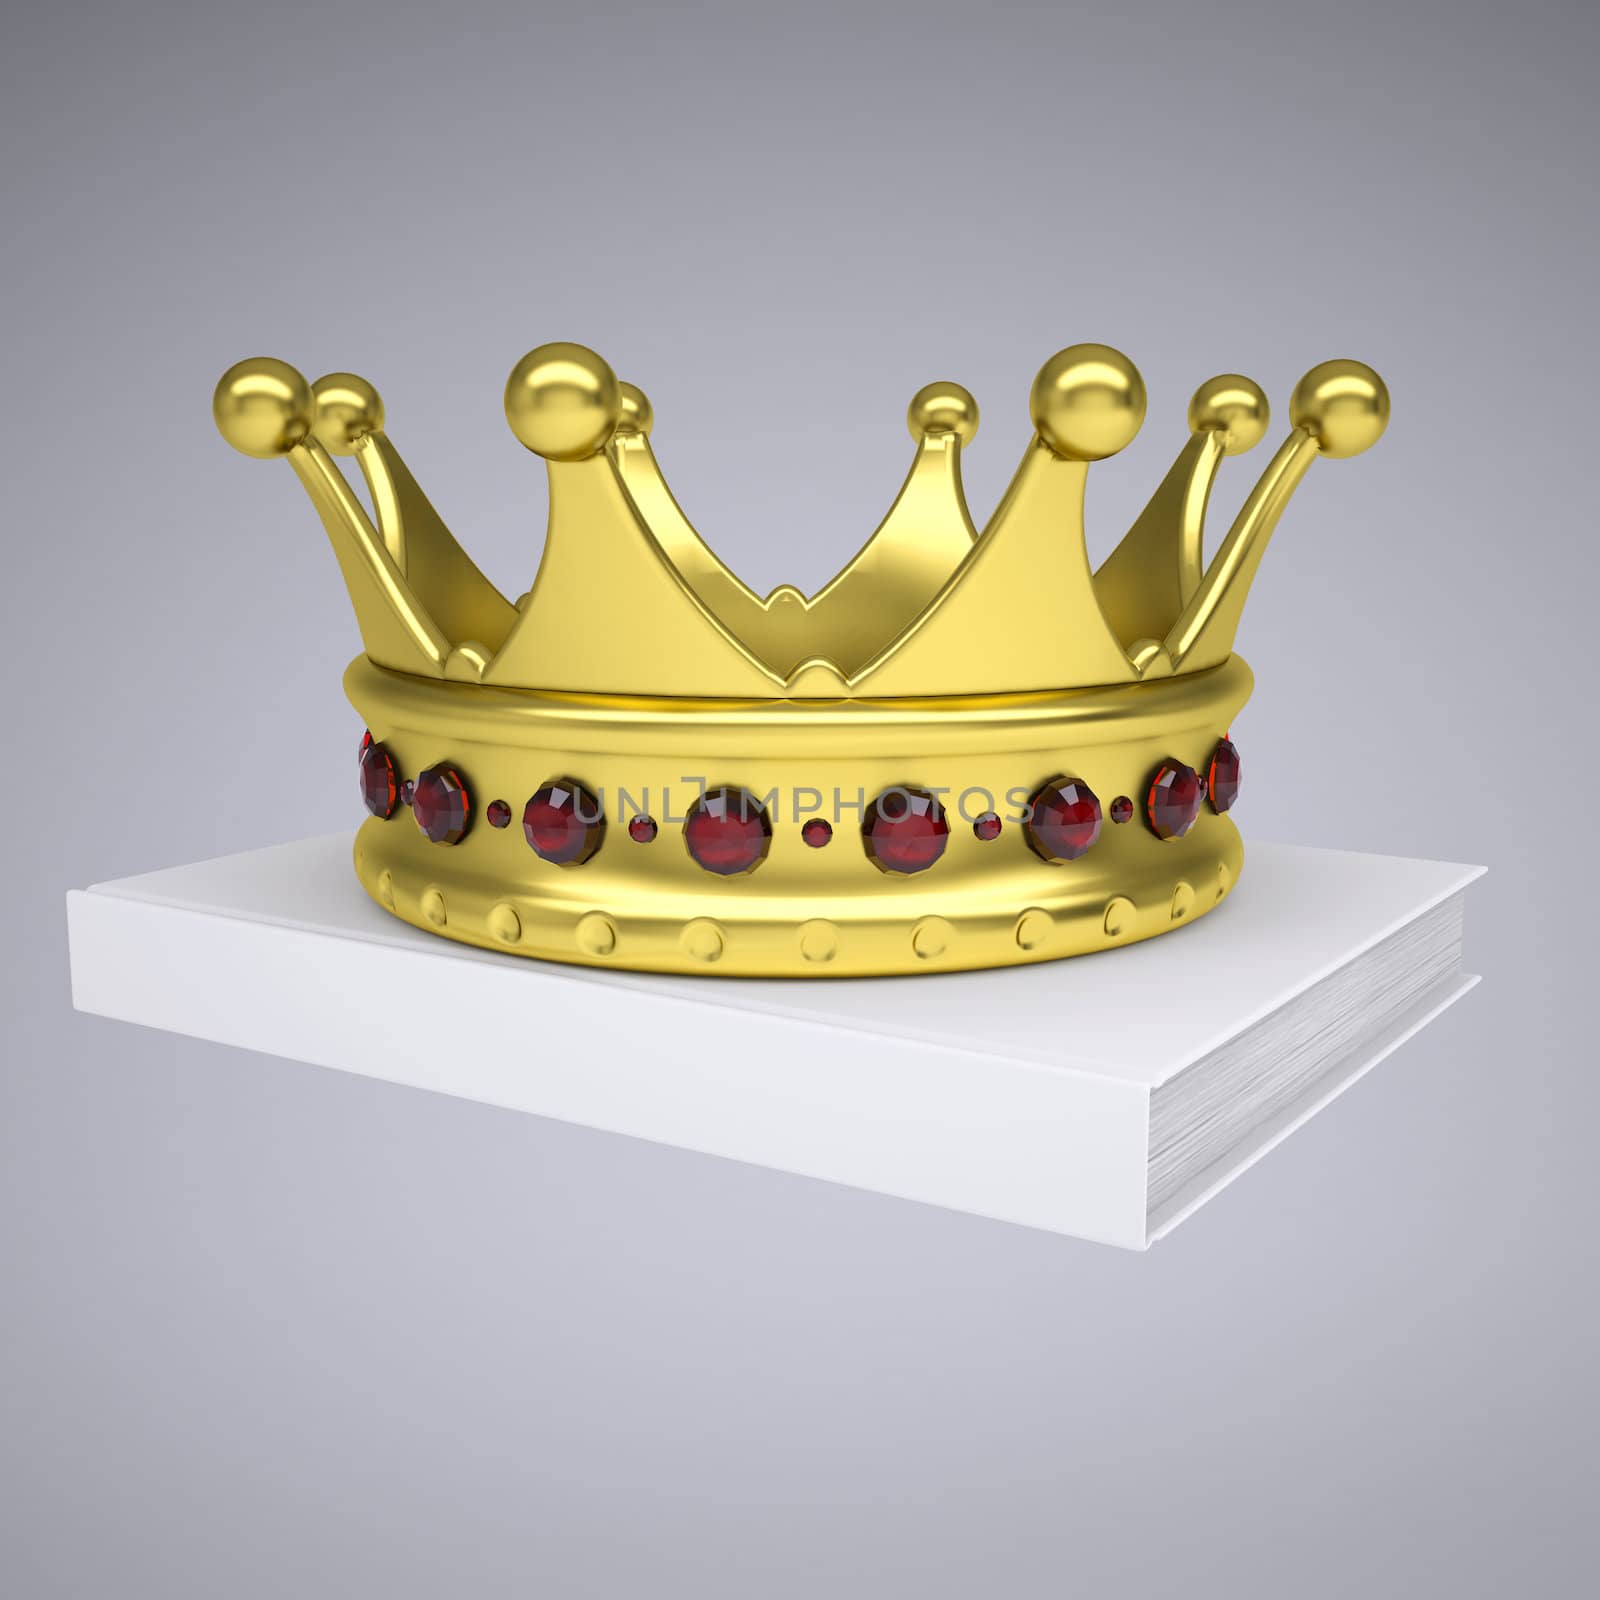 A white book and gold crown. Isolated render on a gray background